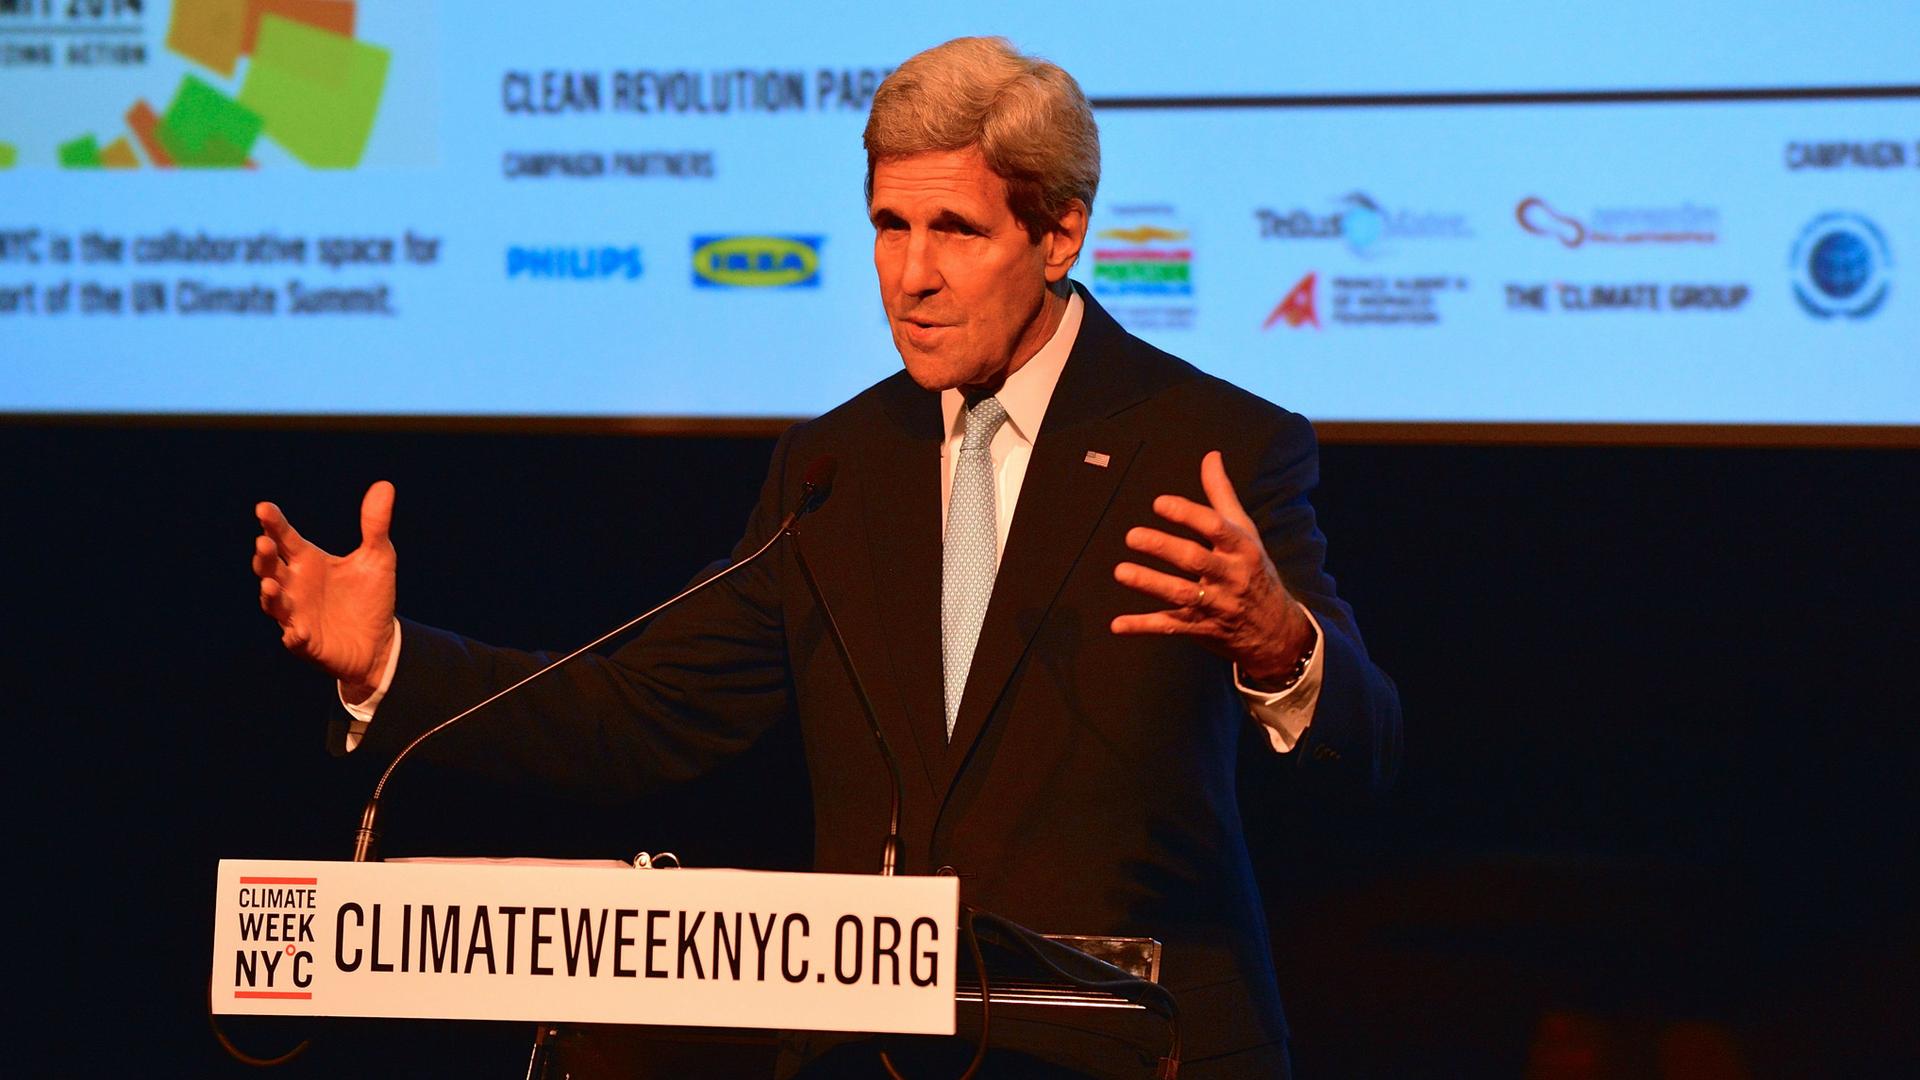 Kerry at Climate Week 2014